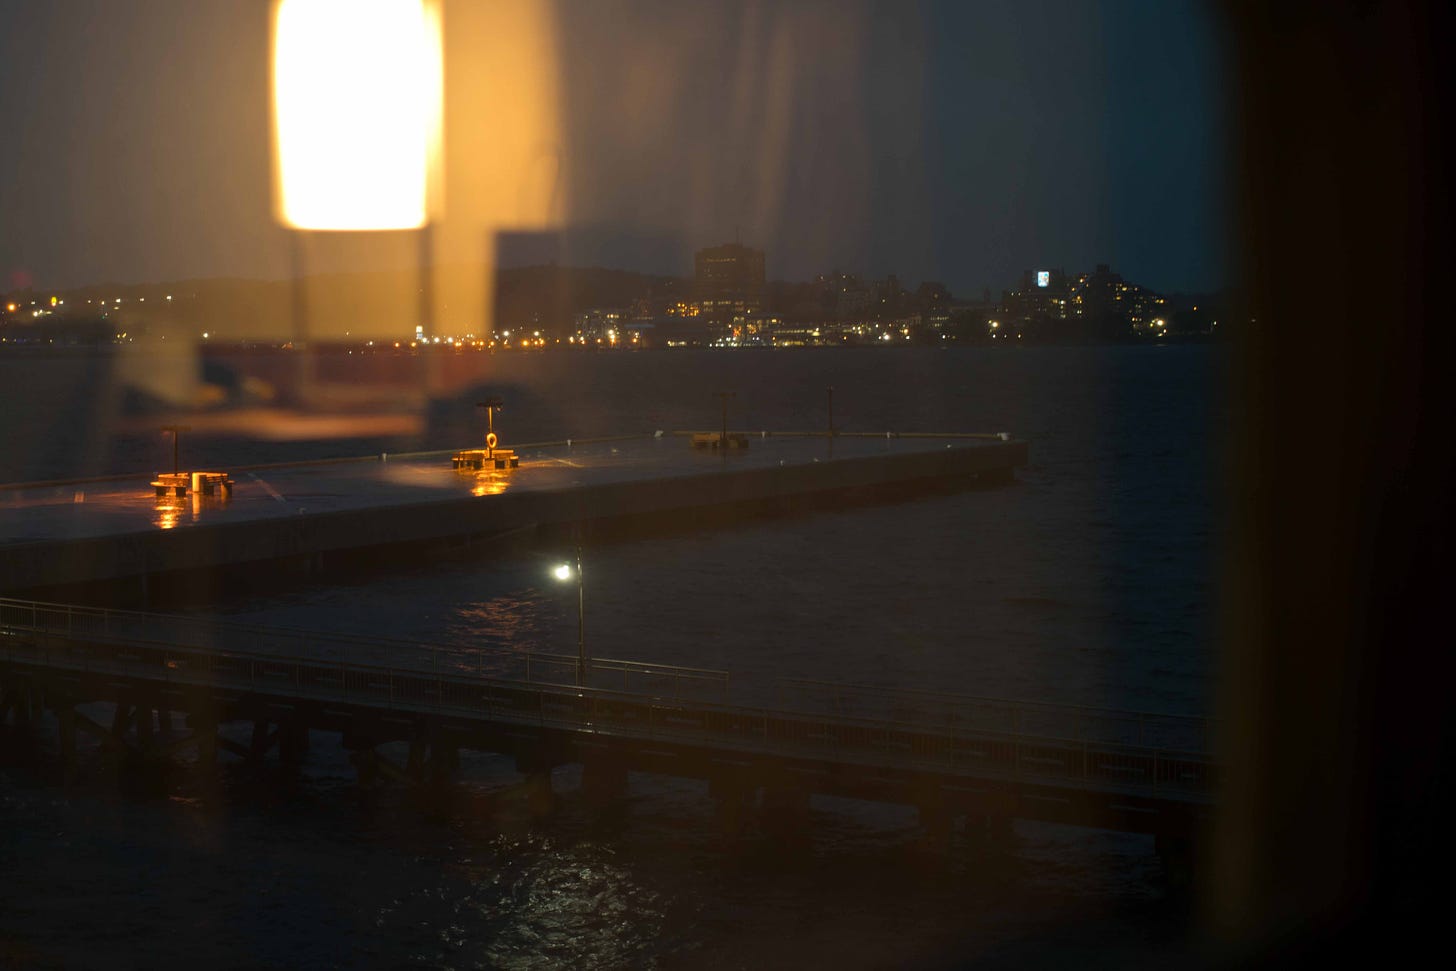 Reflection of hotel lamp in window during Hurricane Fiona hitting the Halifax Harbour. September 2022. Photo credit: Nancy Forde